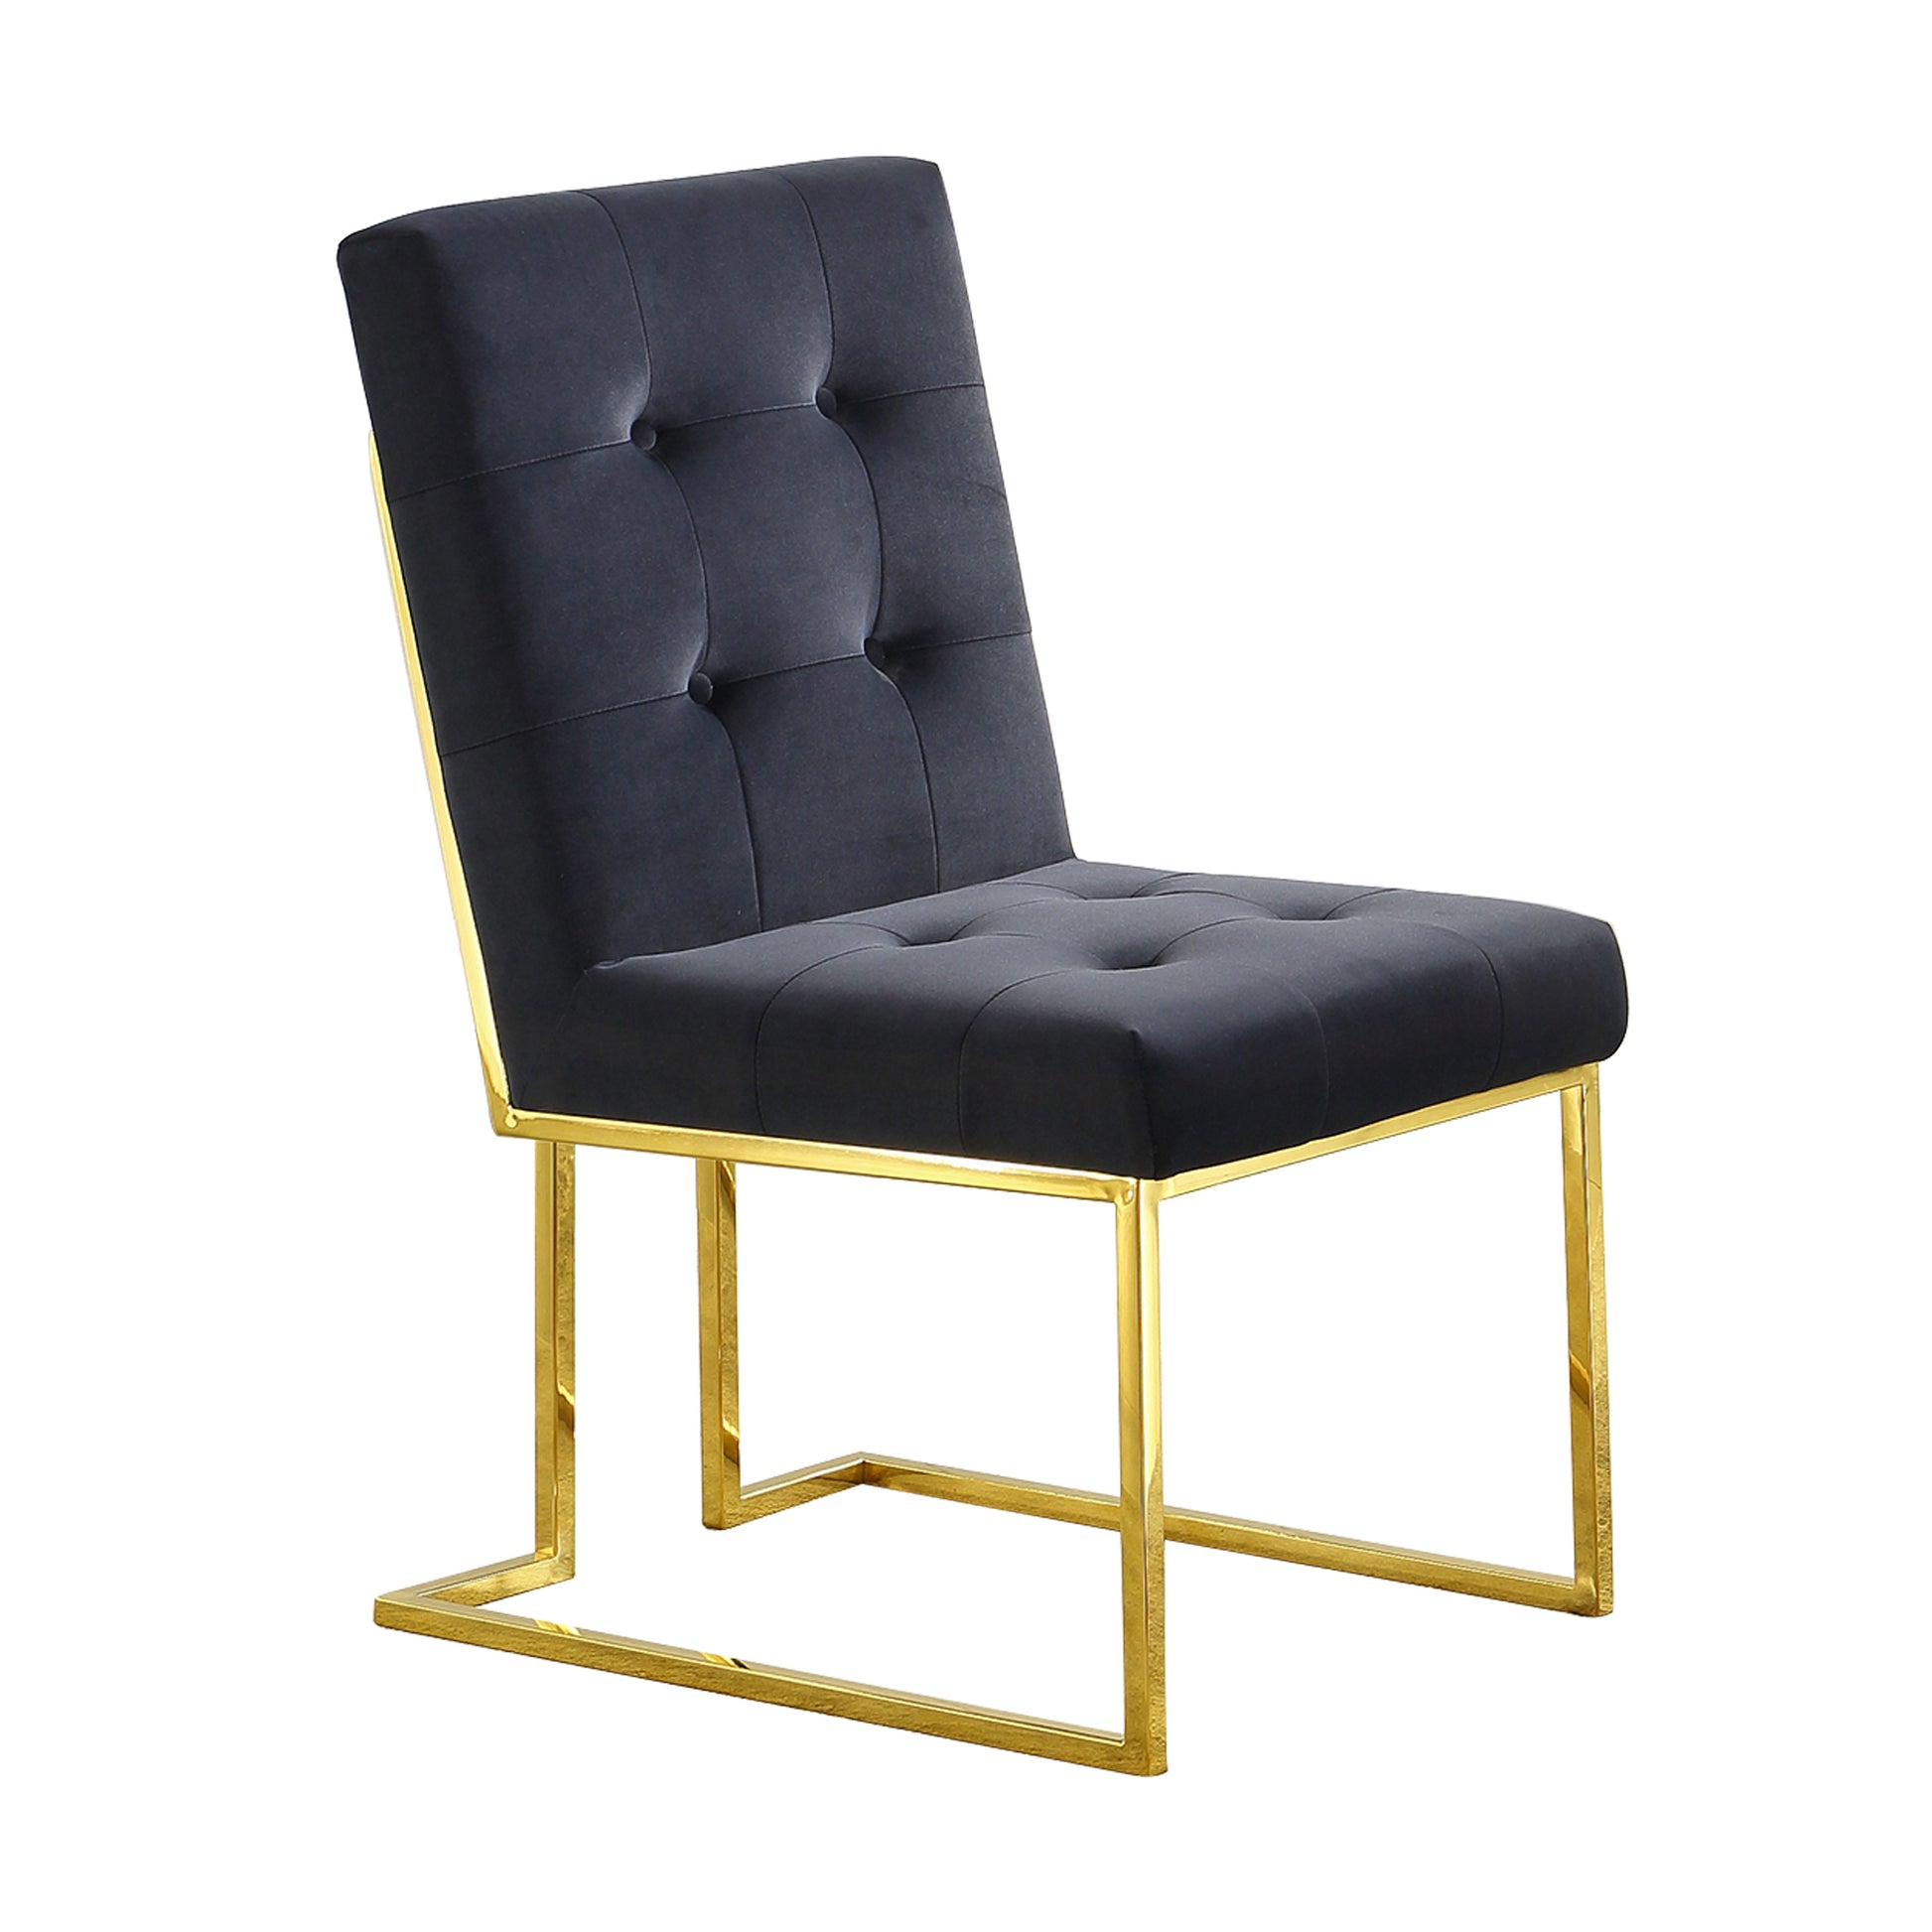 Modern Velvet Dining Chair Set of 2, Tufted Design and Gold Finish Stainless Base - Enova Luxe Home Store